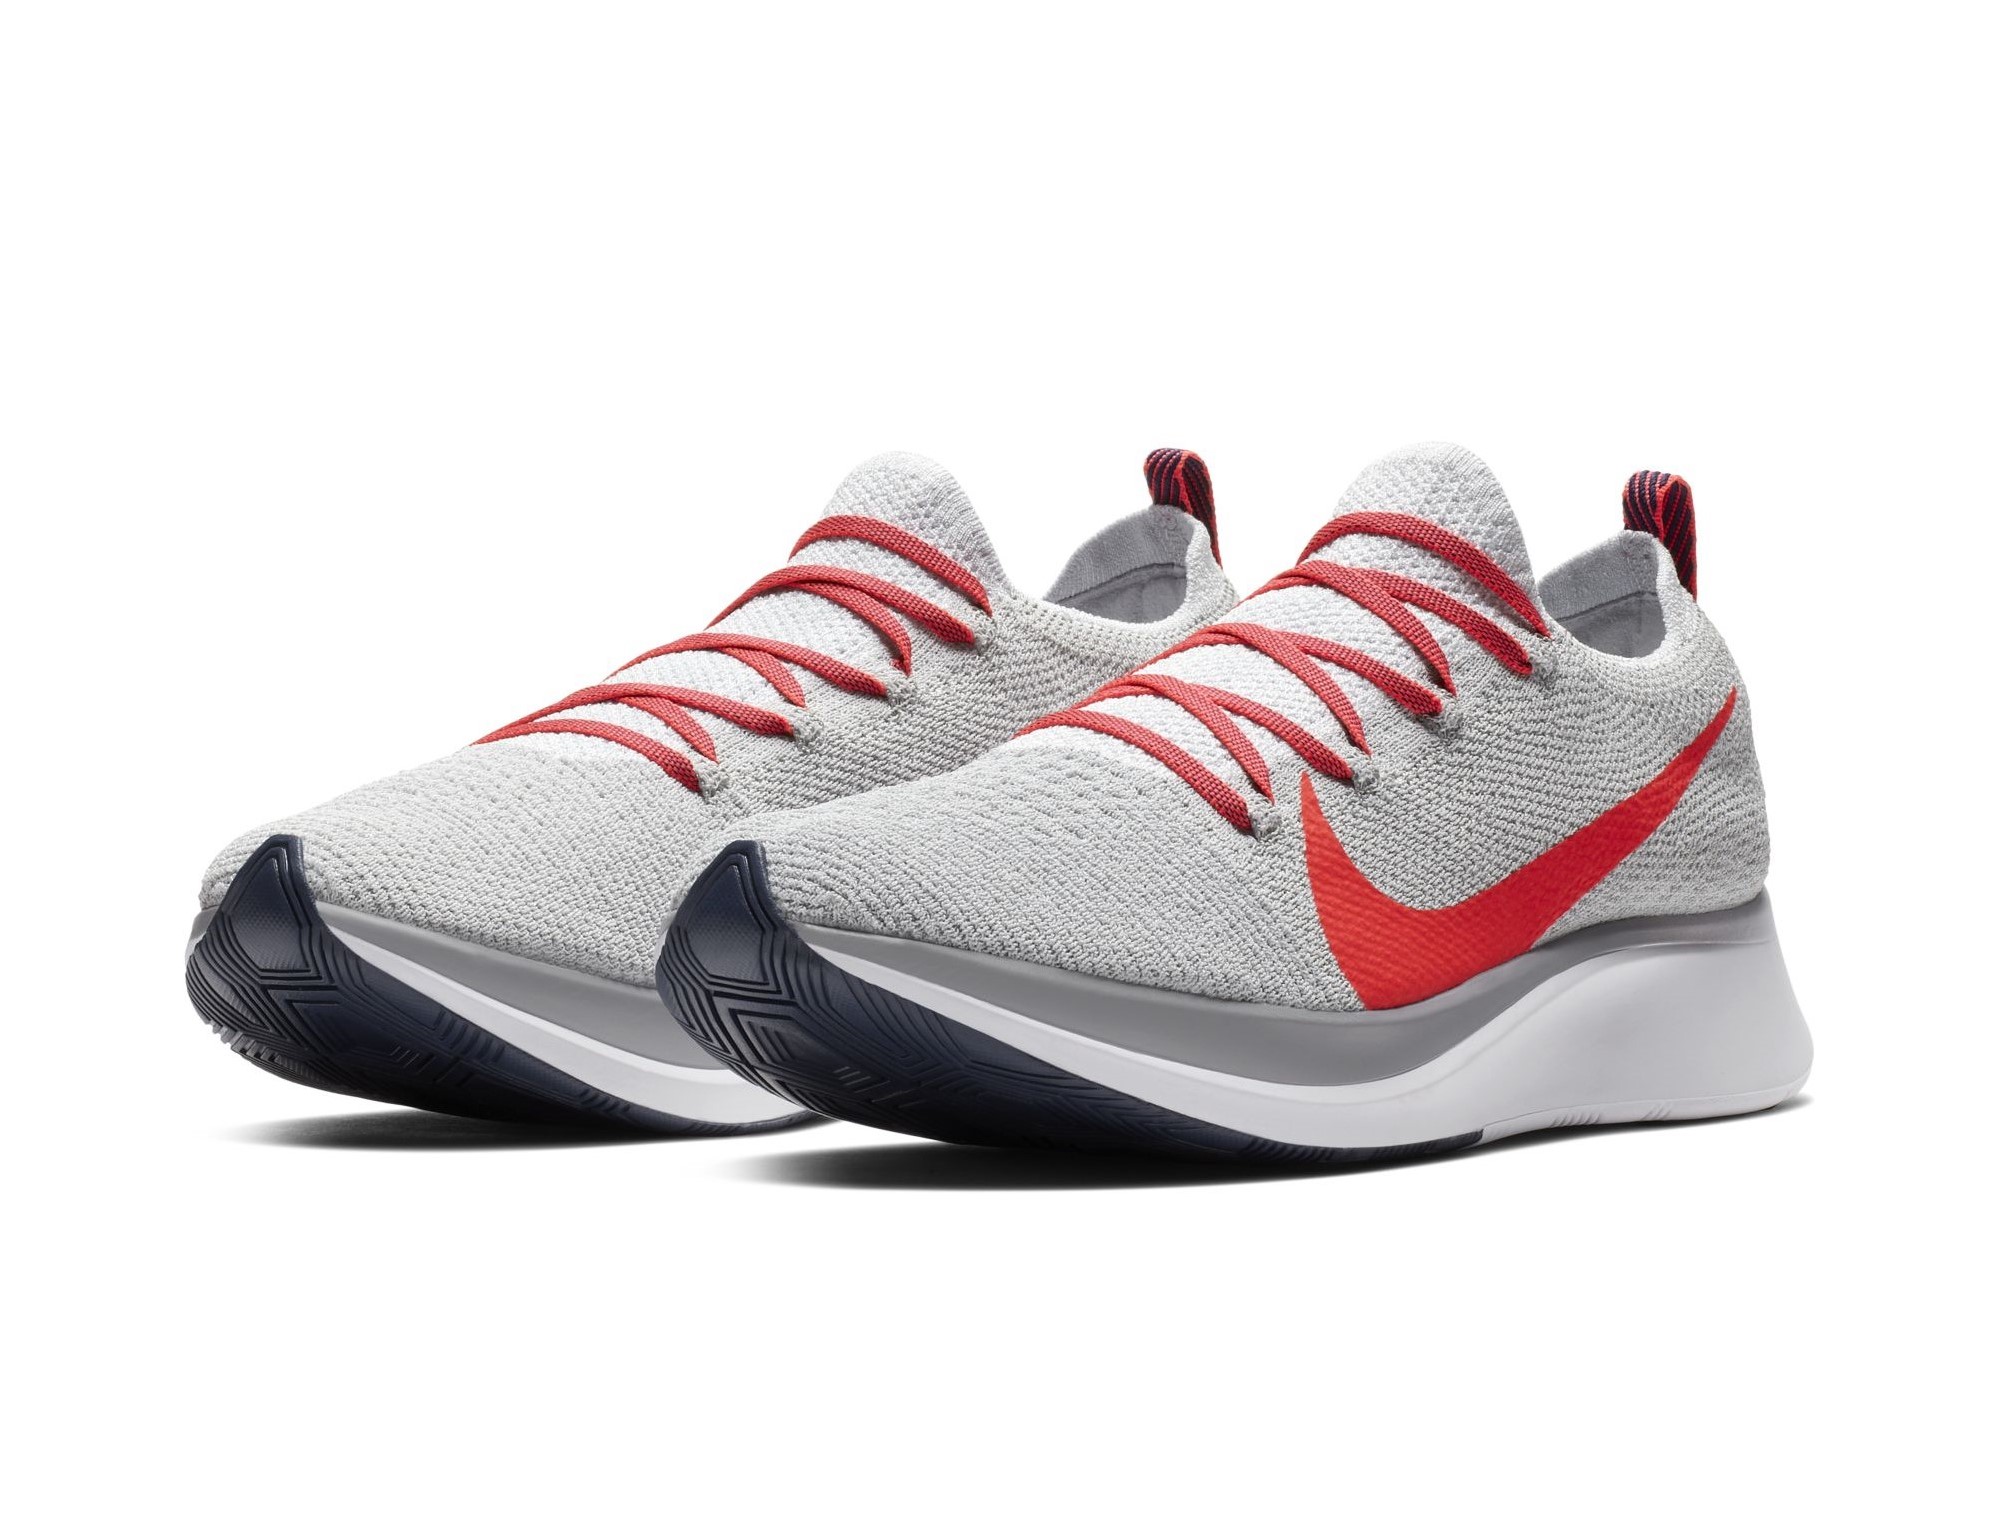 compensar olvidar Municipios Here's What Nike Has Planned for the Zoom Fly Flyknit - WearTesters